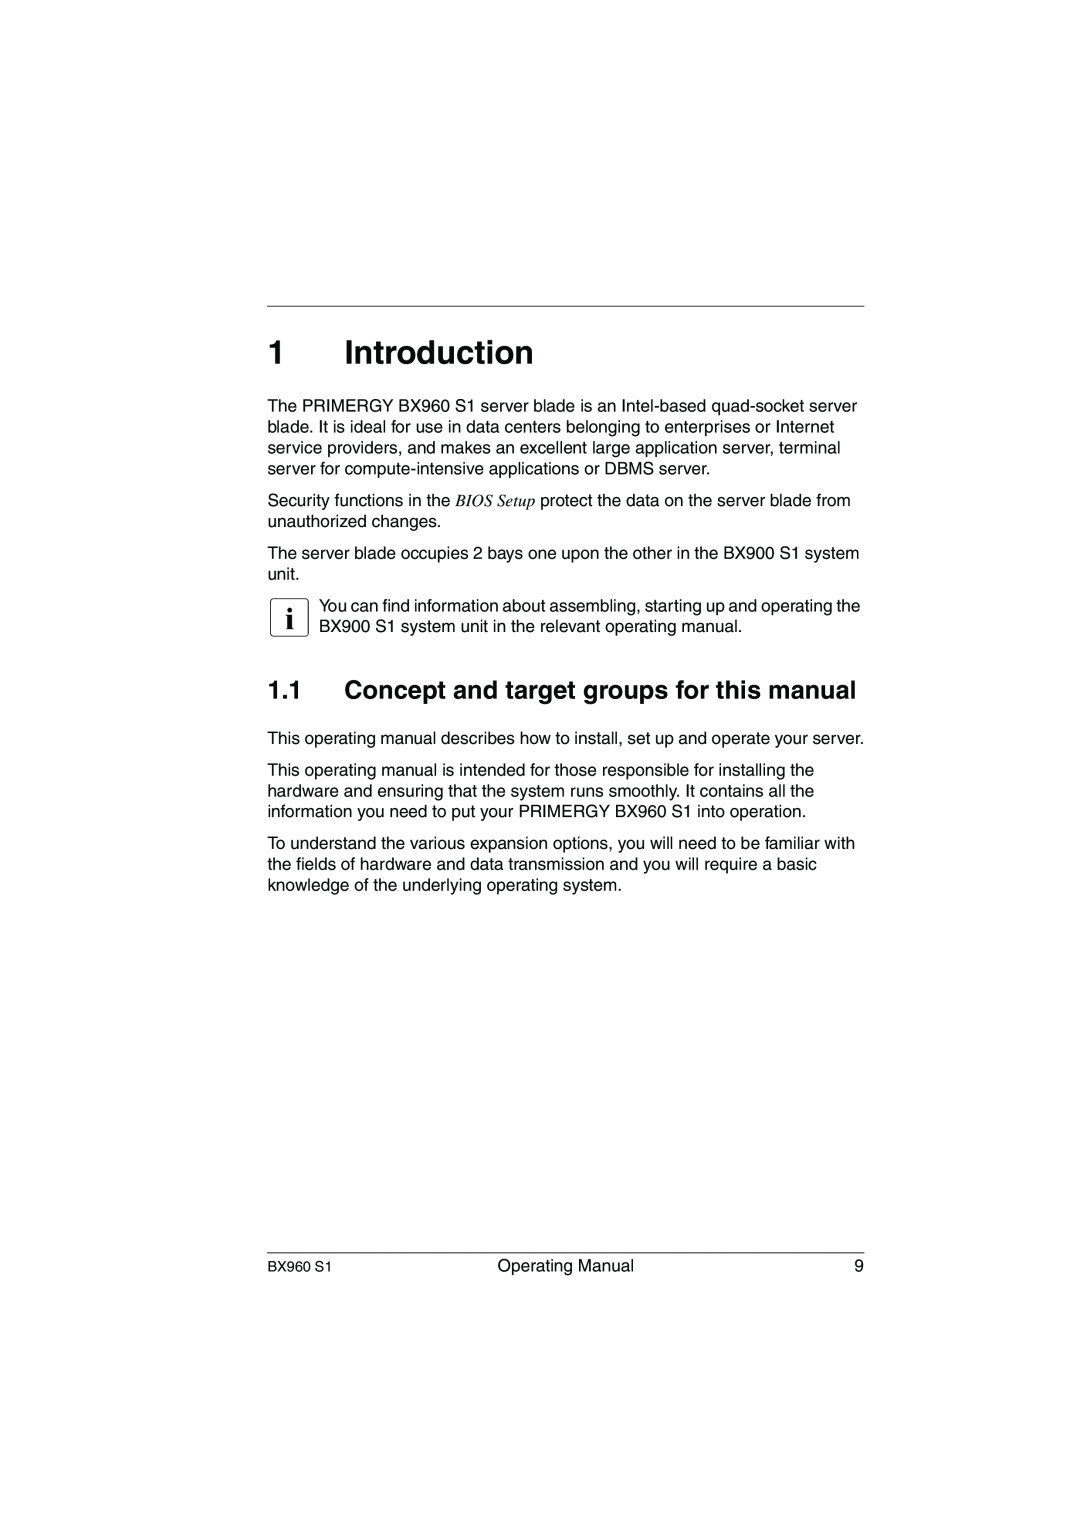 Fujitsu BX960 S1 Introduction, Concept and target groups for this manual 